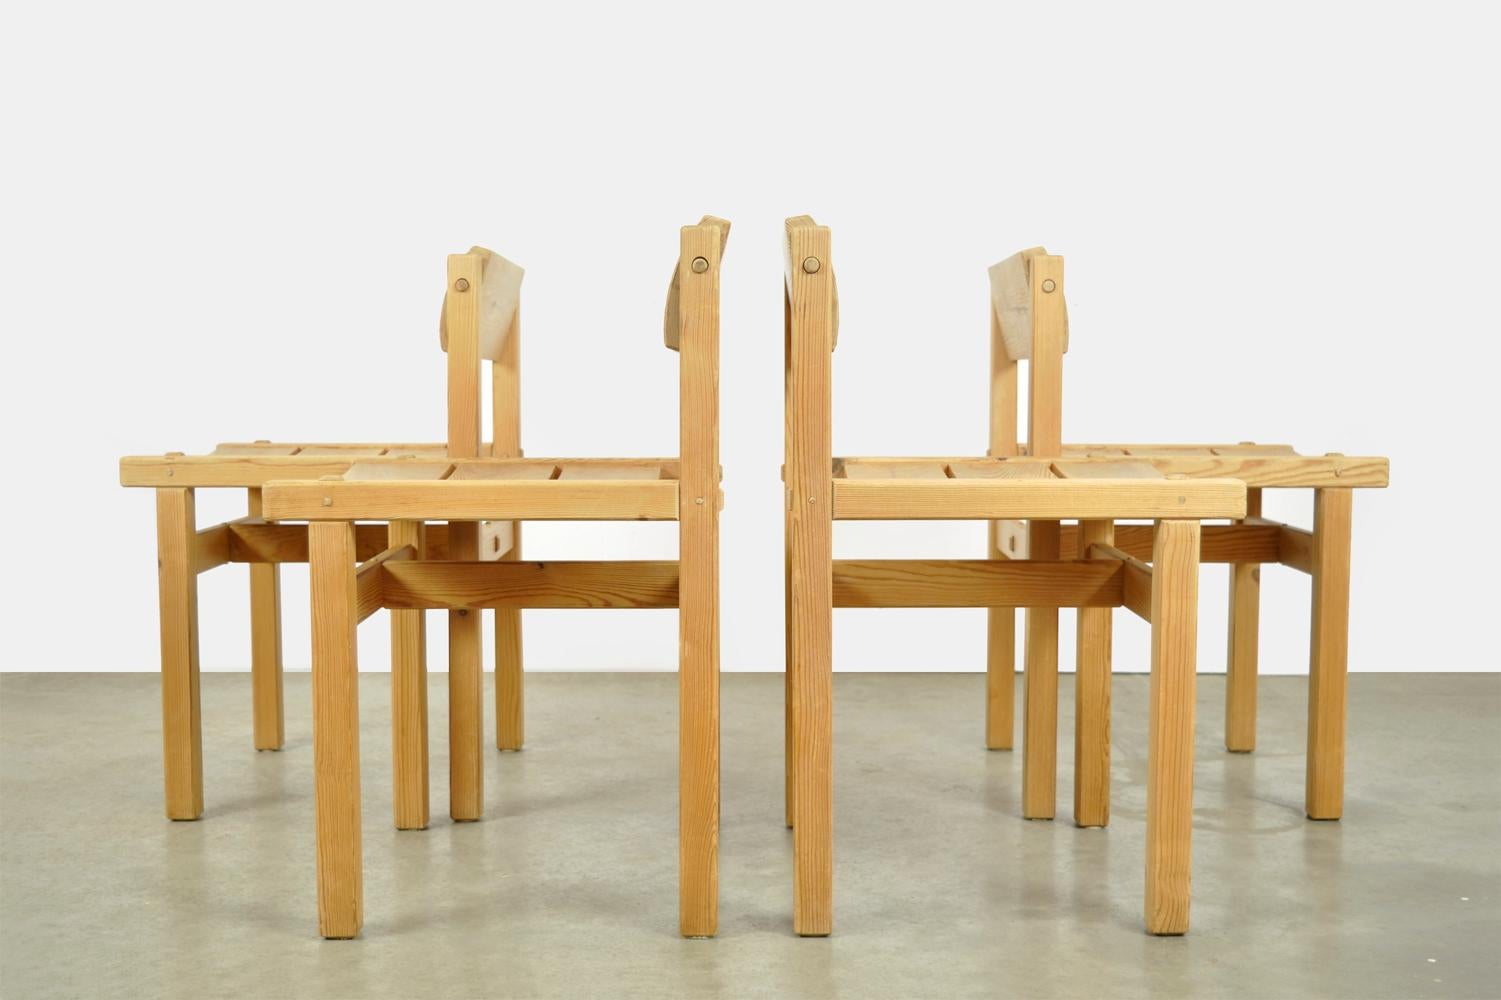 Set of 4 pine dining table chairs from the “Trybo” series designed by Edvin Helseth and produced by Stange Bruk, Norway 1960s. The chairs are constructed with wooden pins and dowels without the help of screws and glue. The backrest is movable for